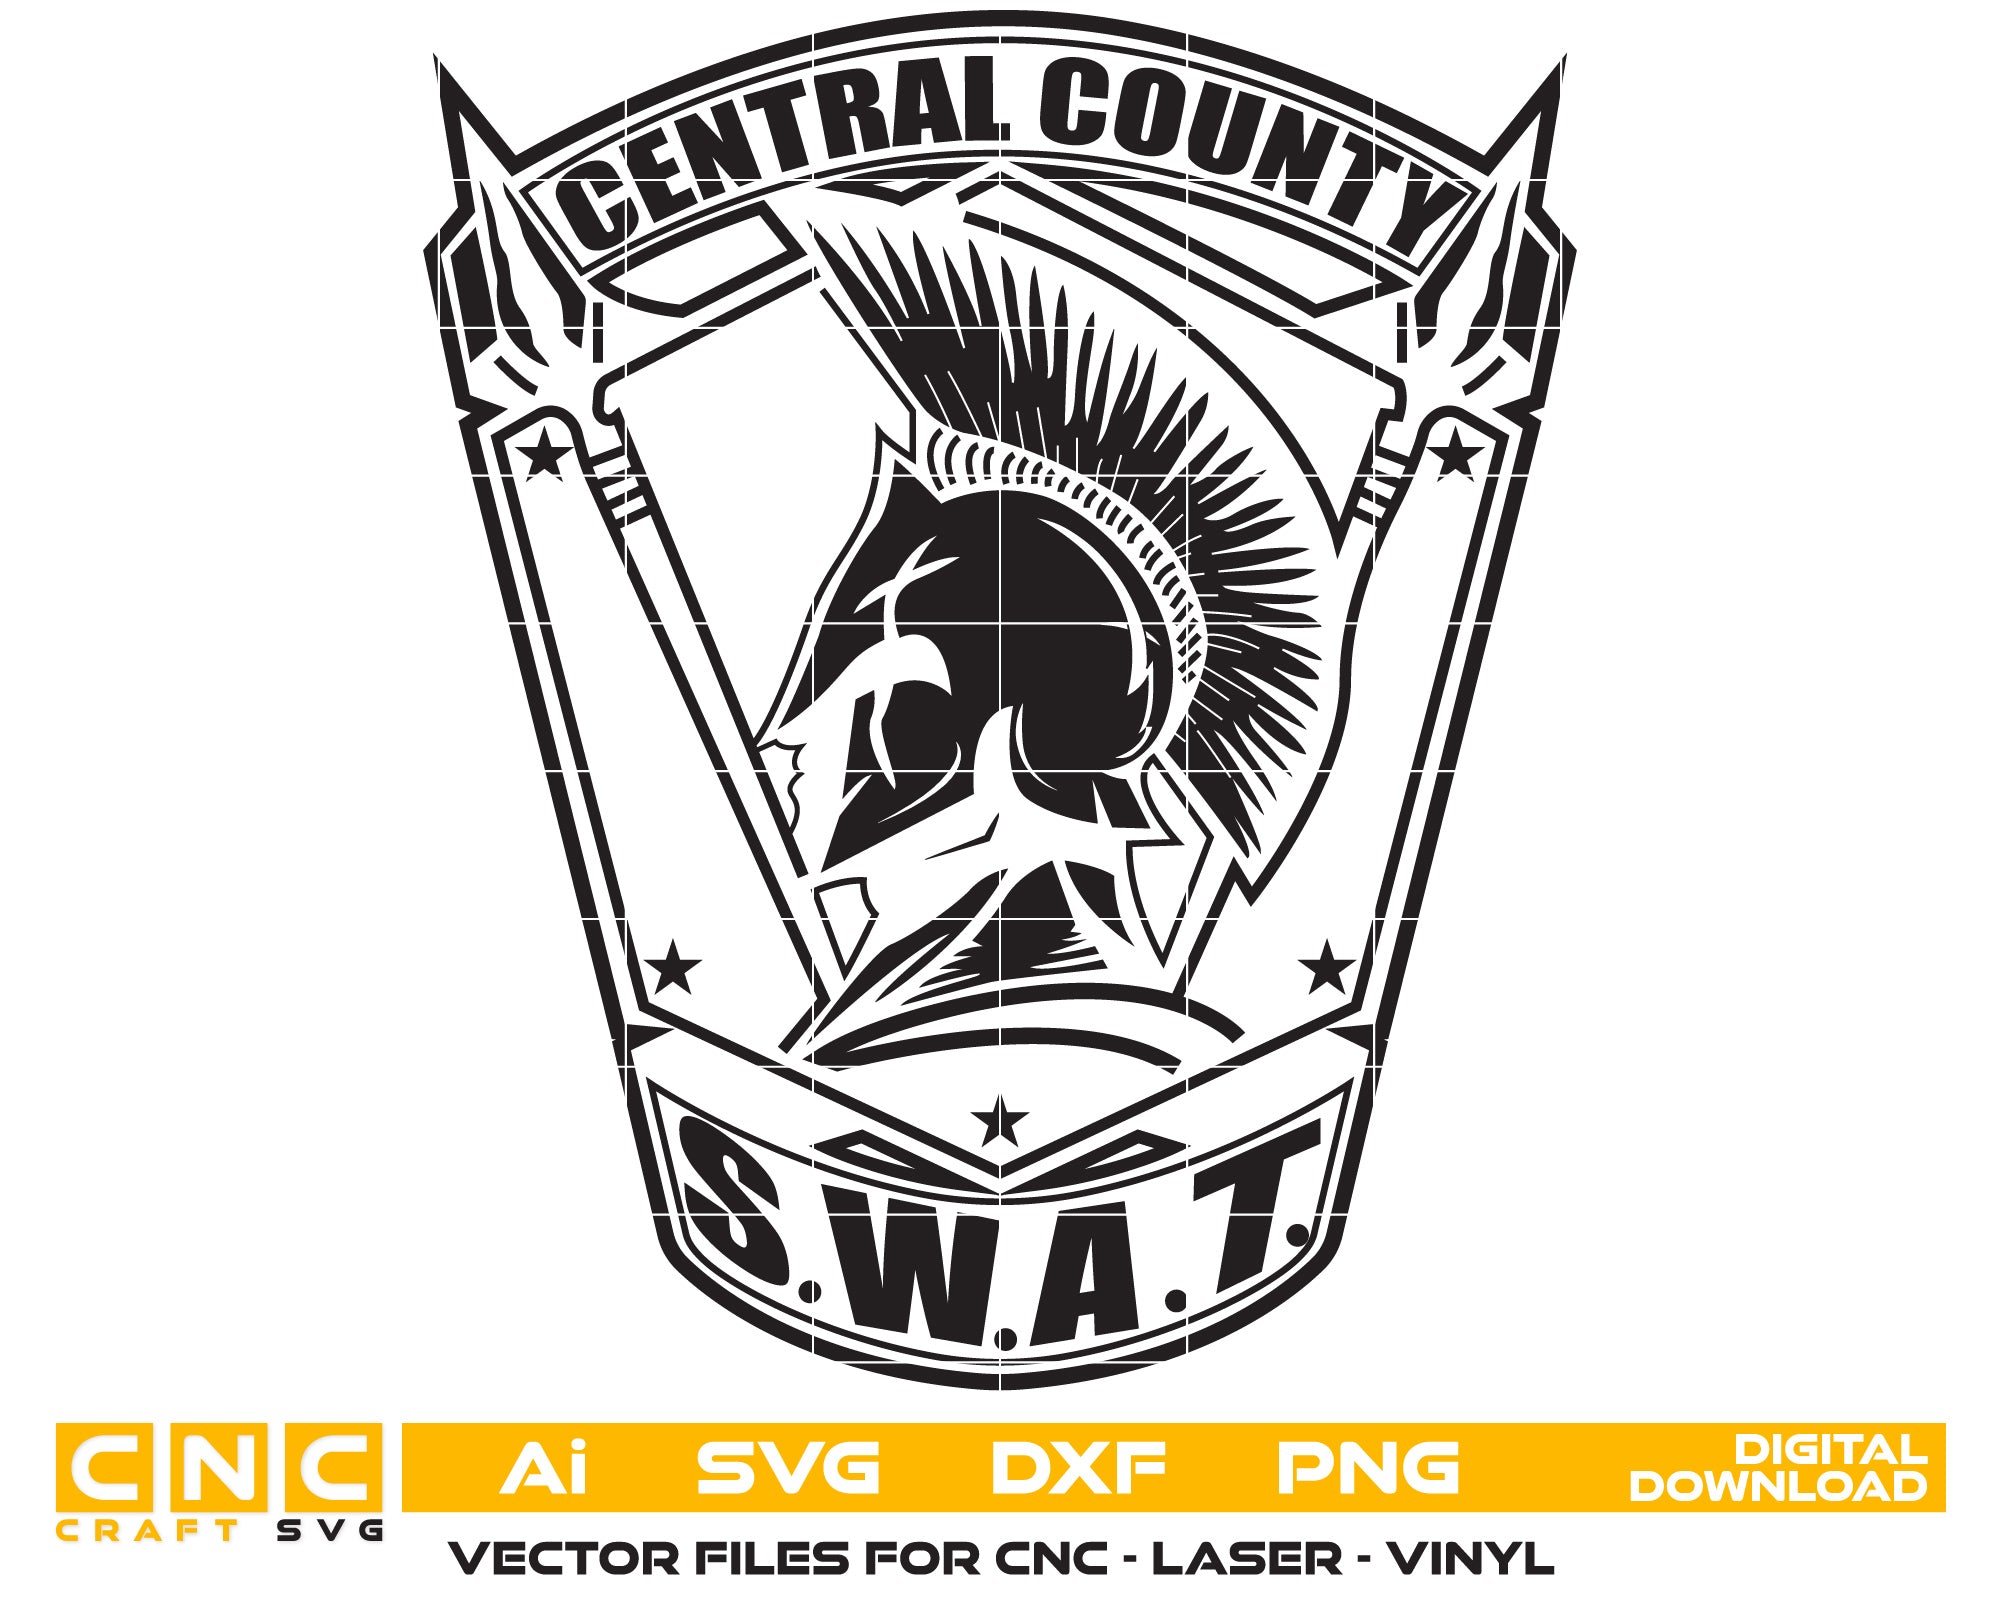 Central County Swat Badge Vector Art, Ai,SVG, DXF, PNG, Digital Files